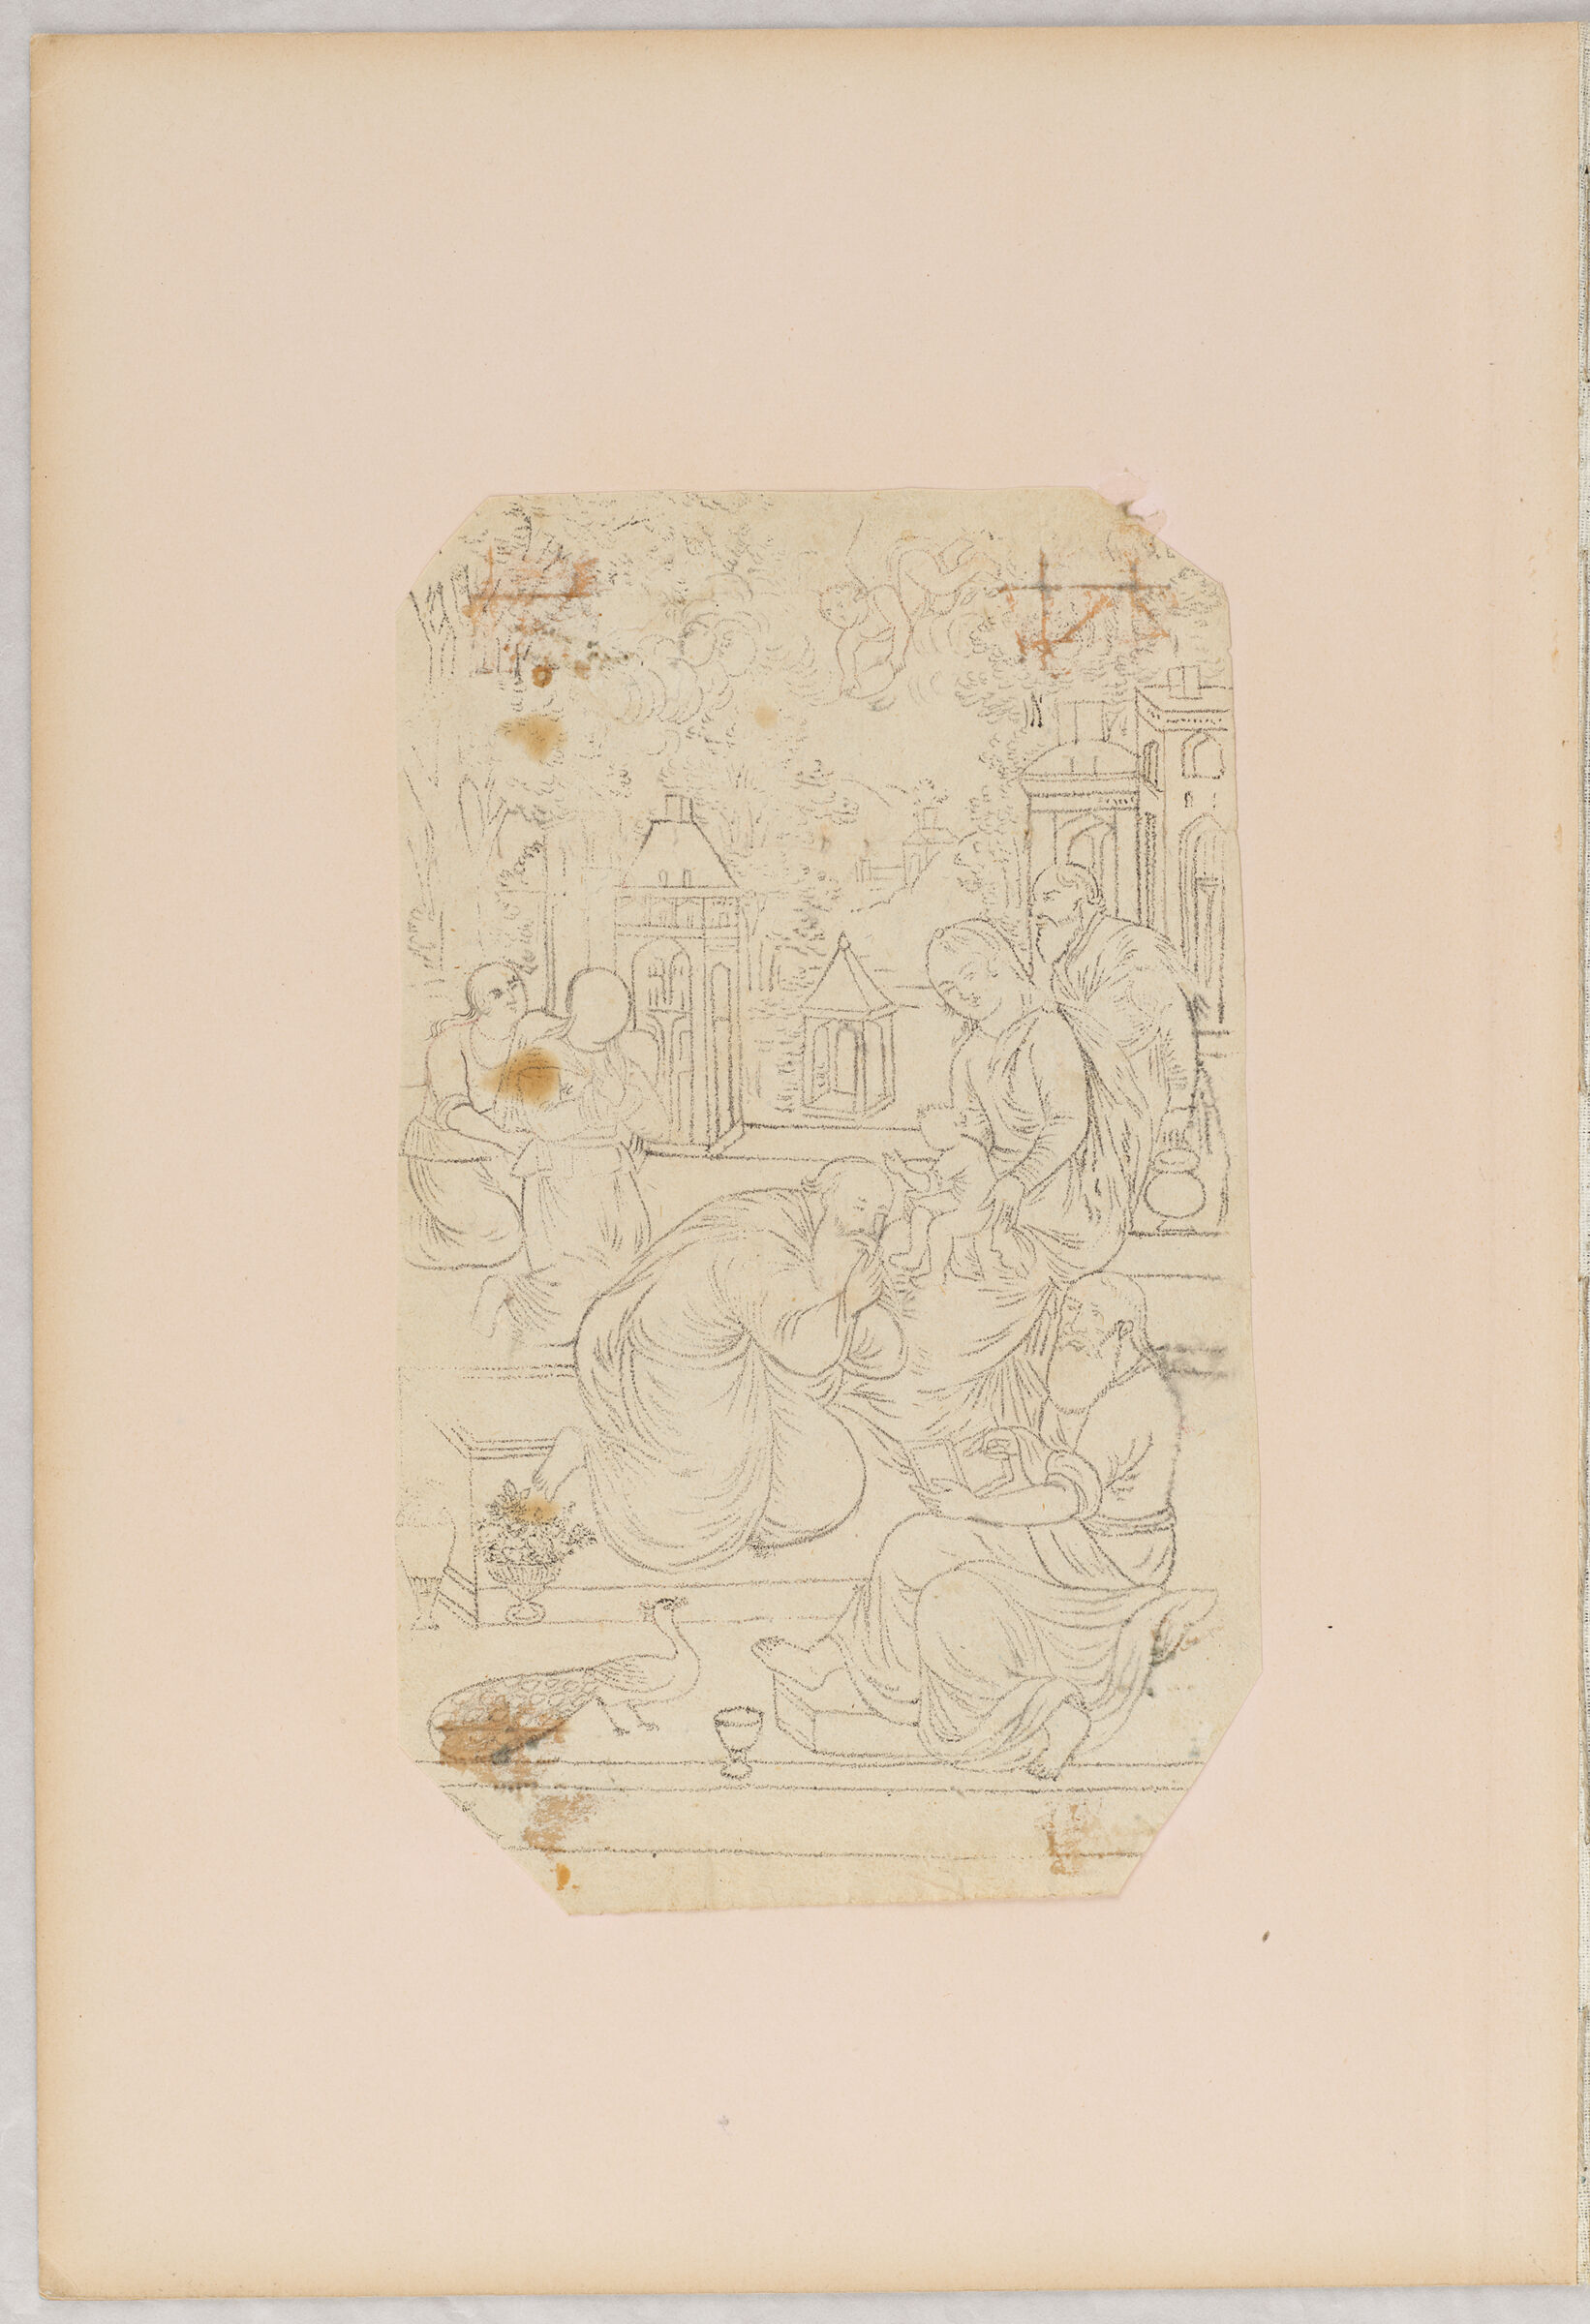 Folio 6 From An Album Of Artists' Drawings From Qajar Iran: Virgin And Child With Elderly Men And Attendants (Recto); Amorous Couple With Attendants, Baby, Rabbits, And Birds (Verso)